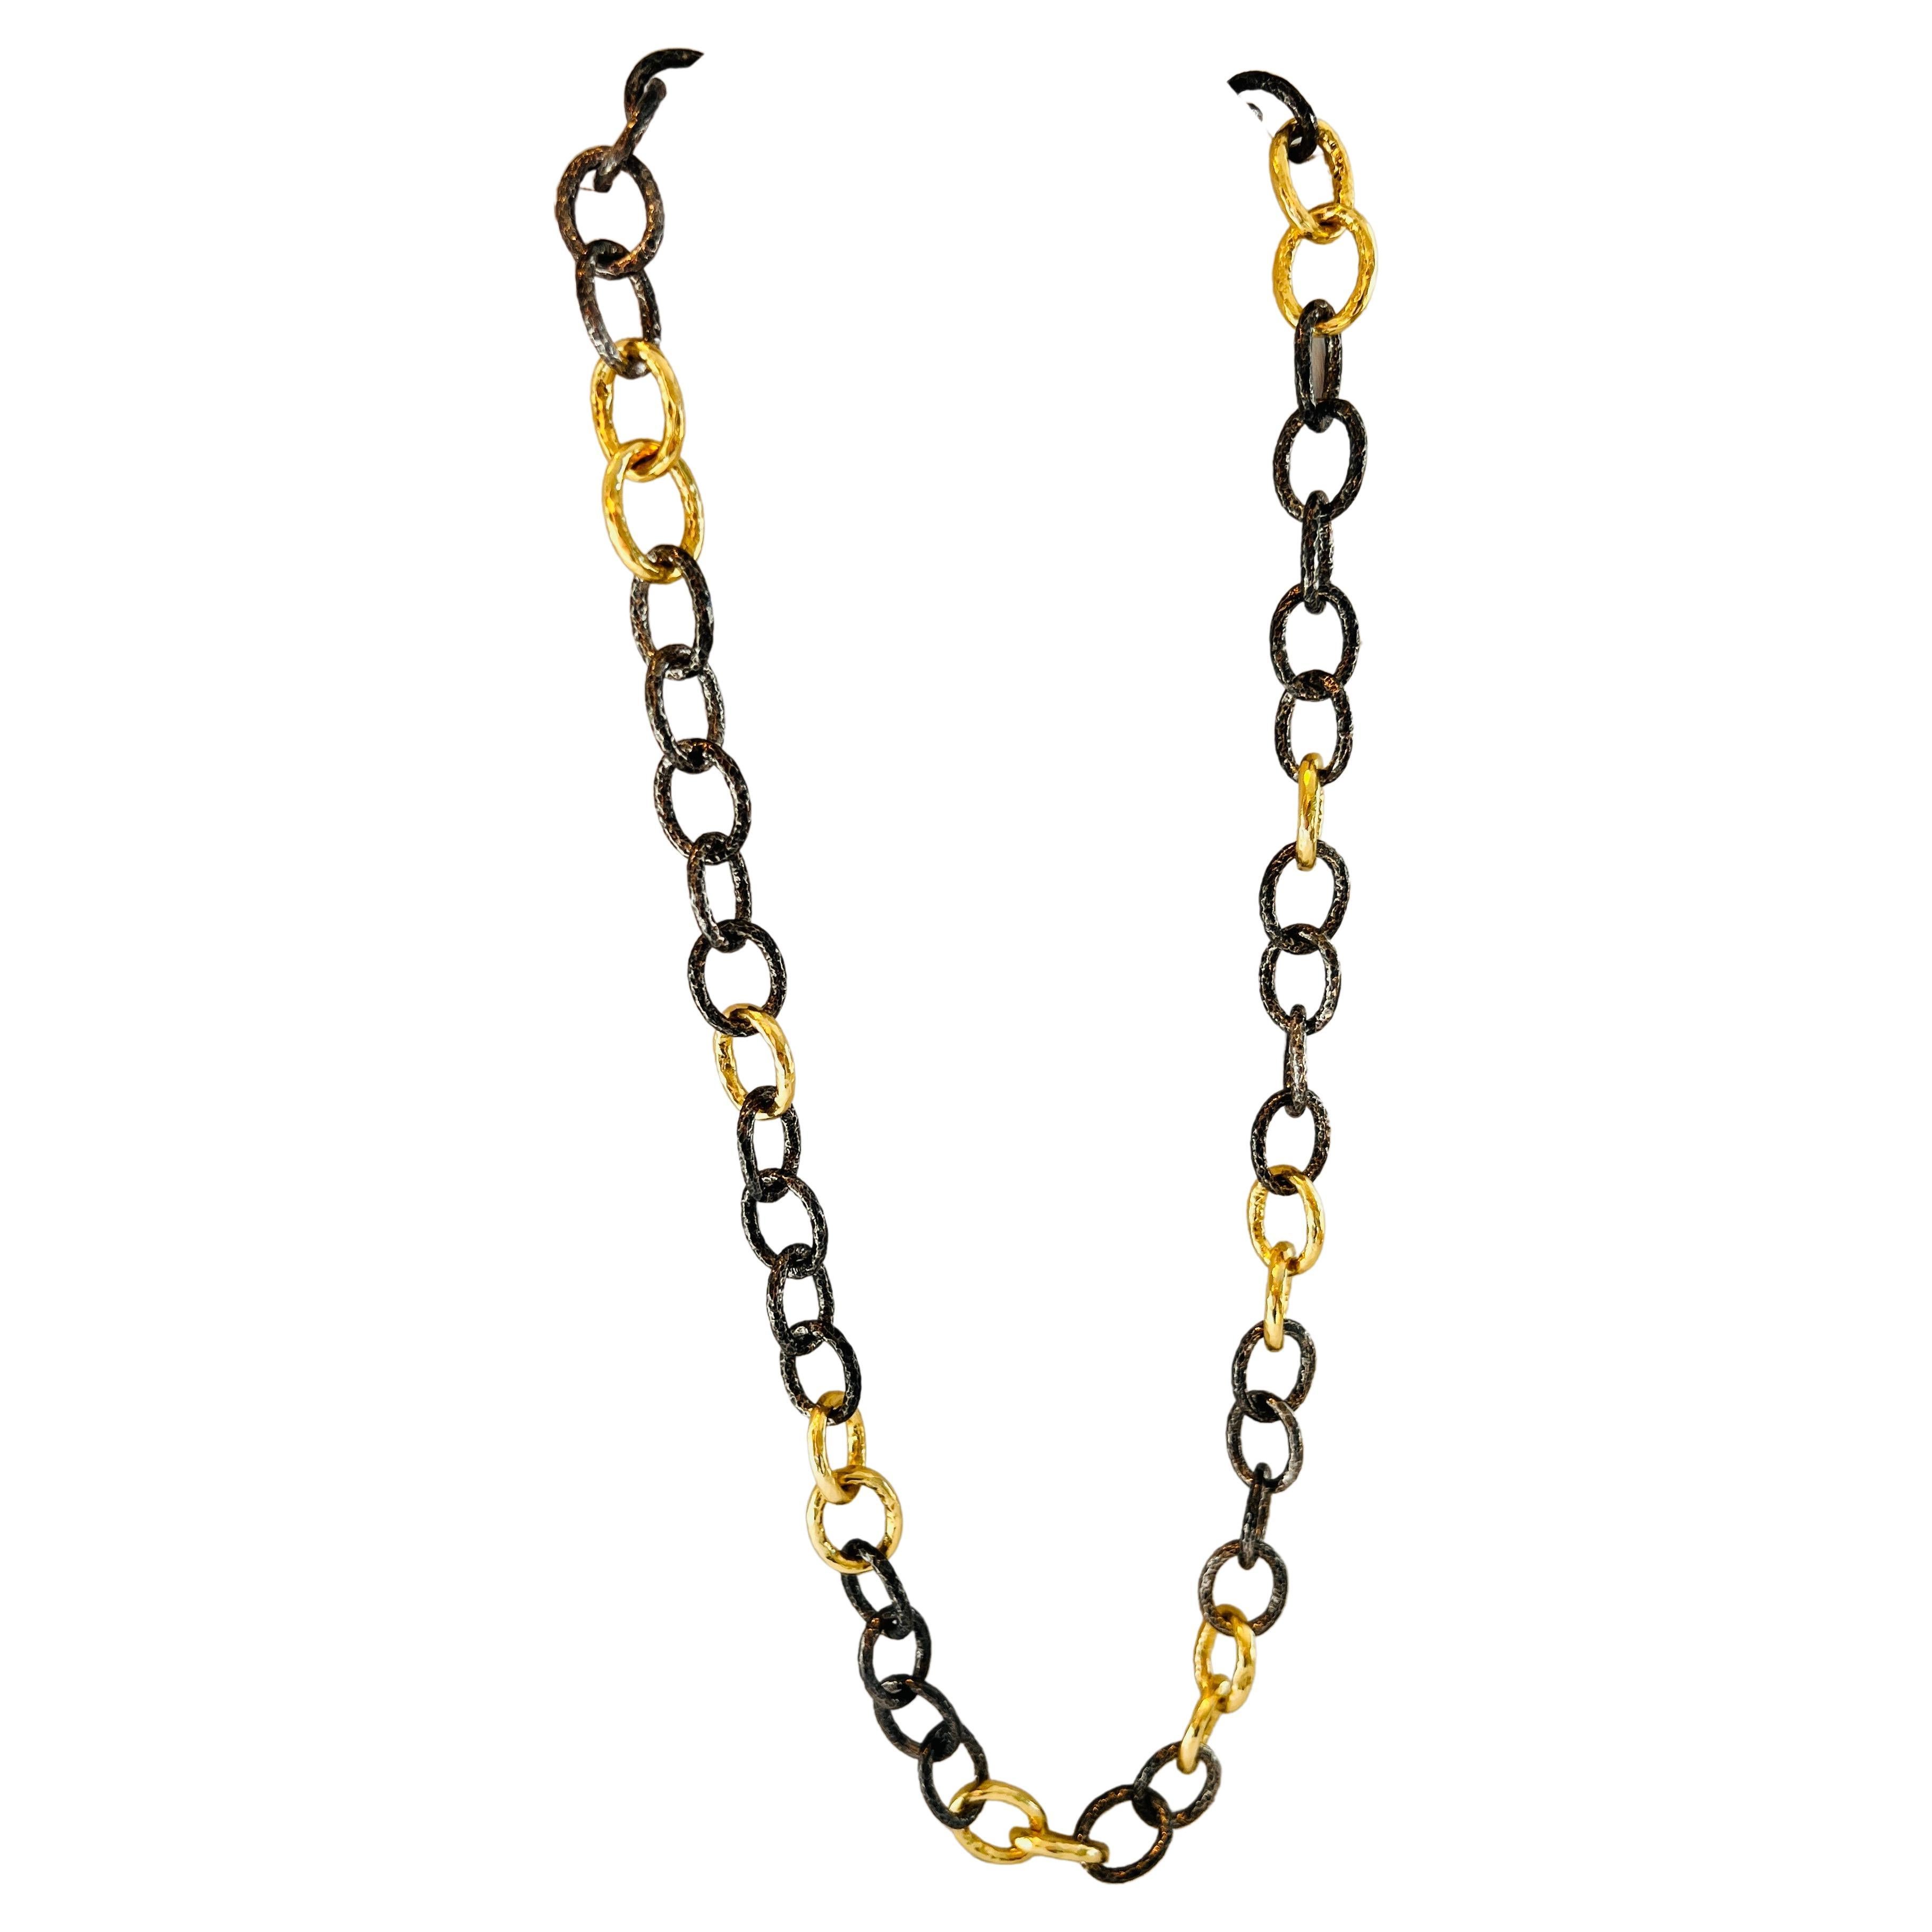 The 50/50 Blackened Silver and Gold 25" Chain Necklace, by Tagili For Sale